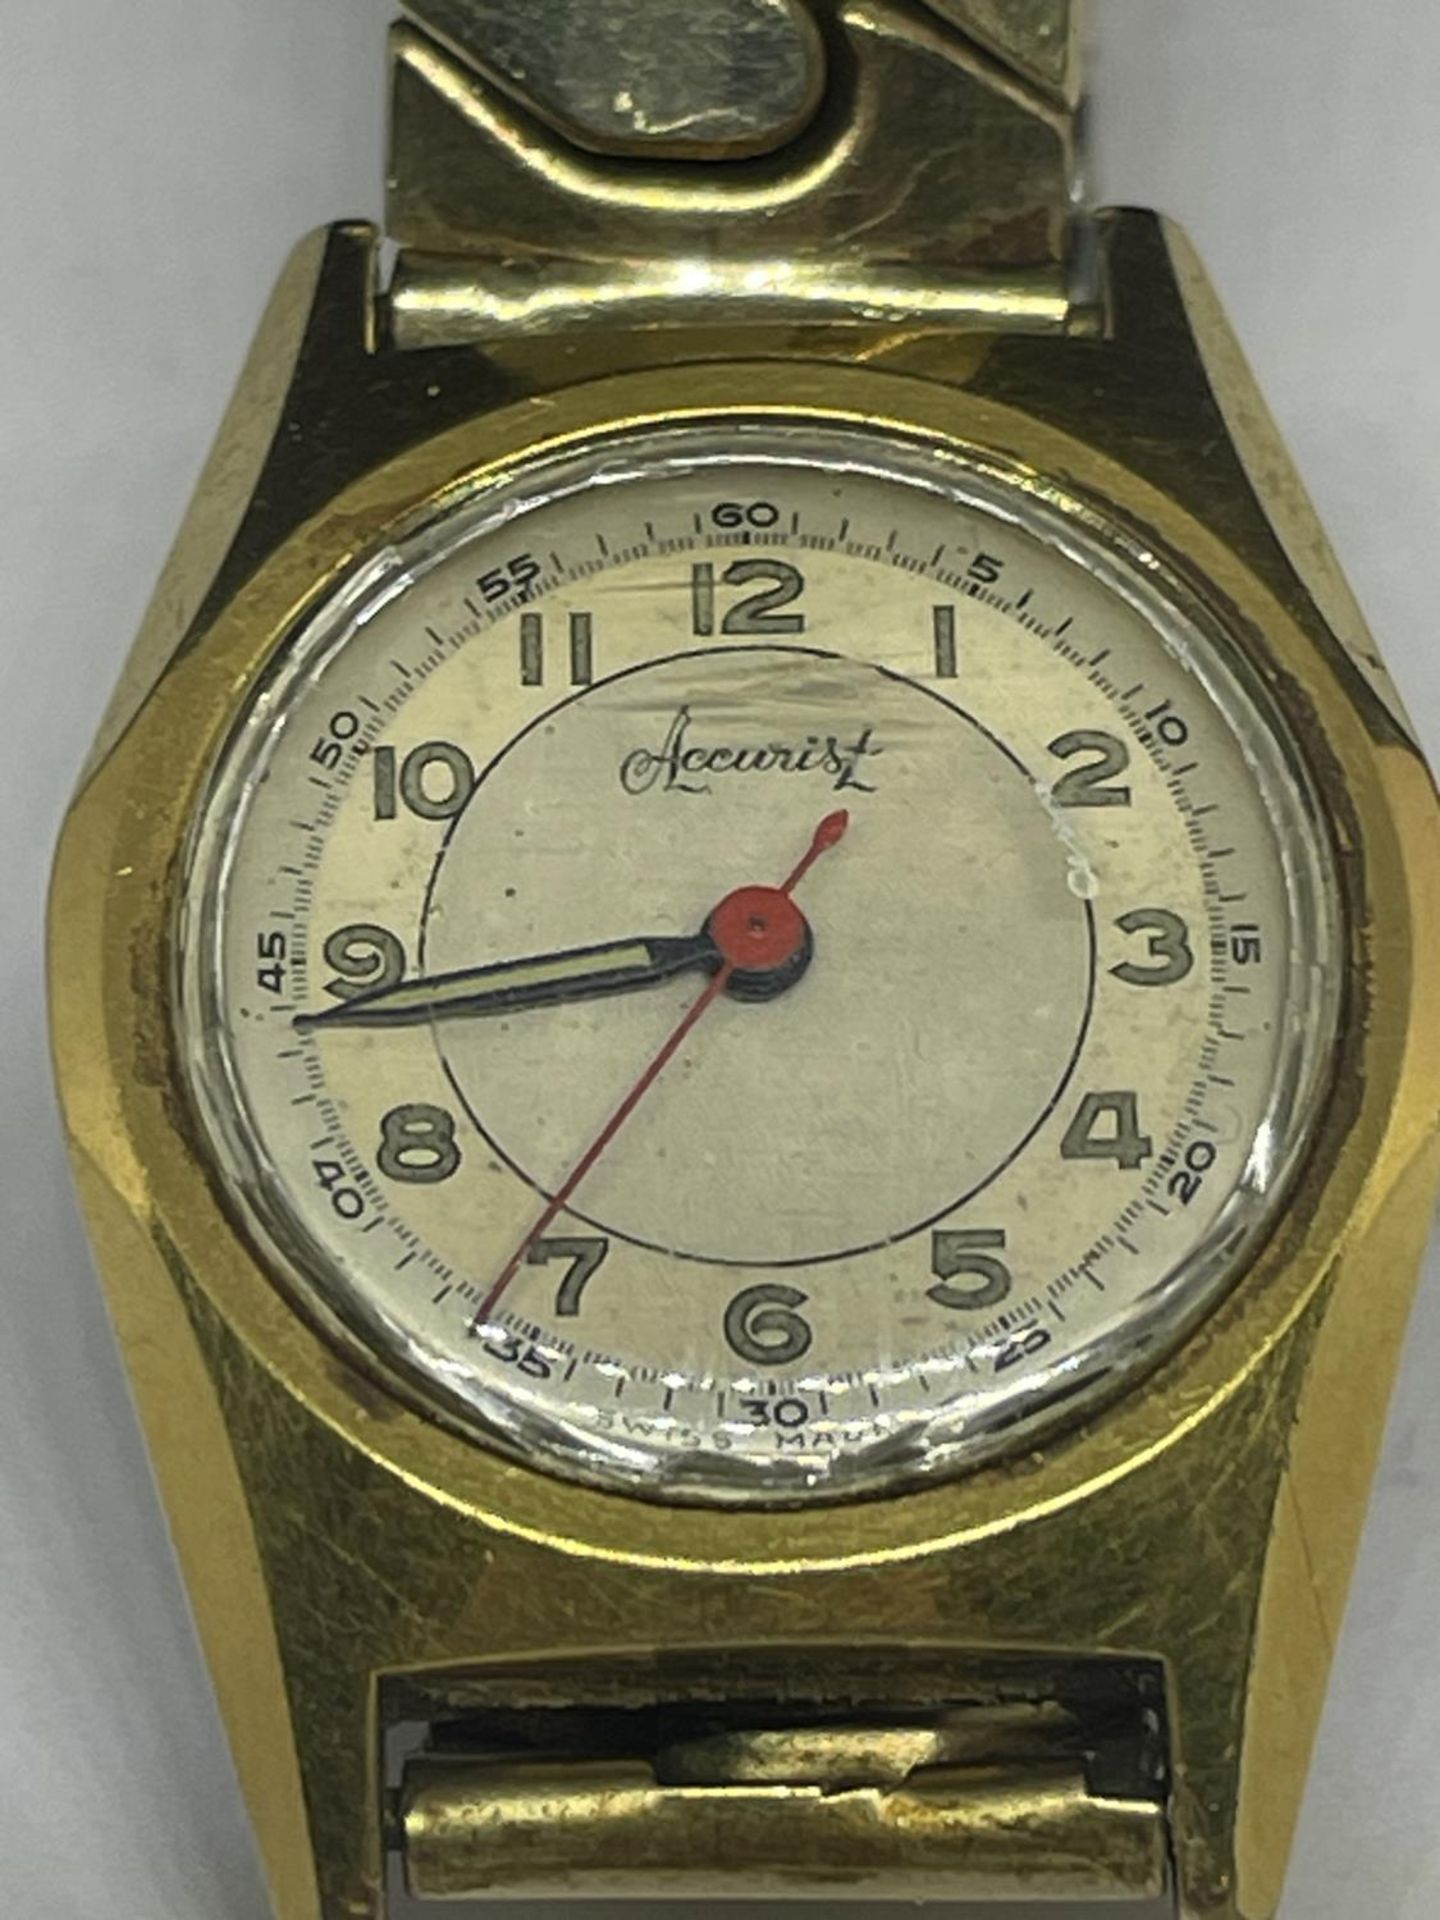 A VINTAGE ACCURIST WRIST WATCH SEEN WORKING BUT NO WARRANTY - Image 2 of 3